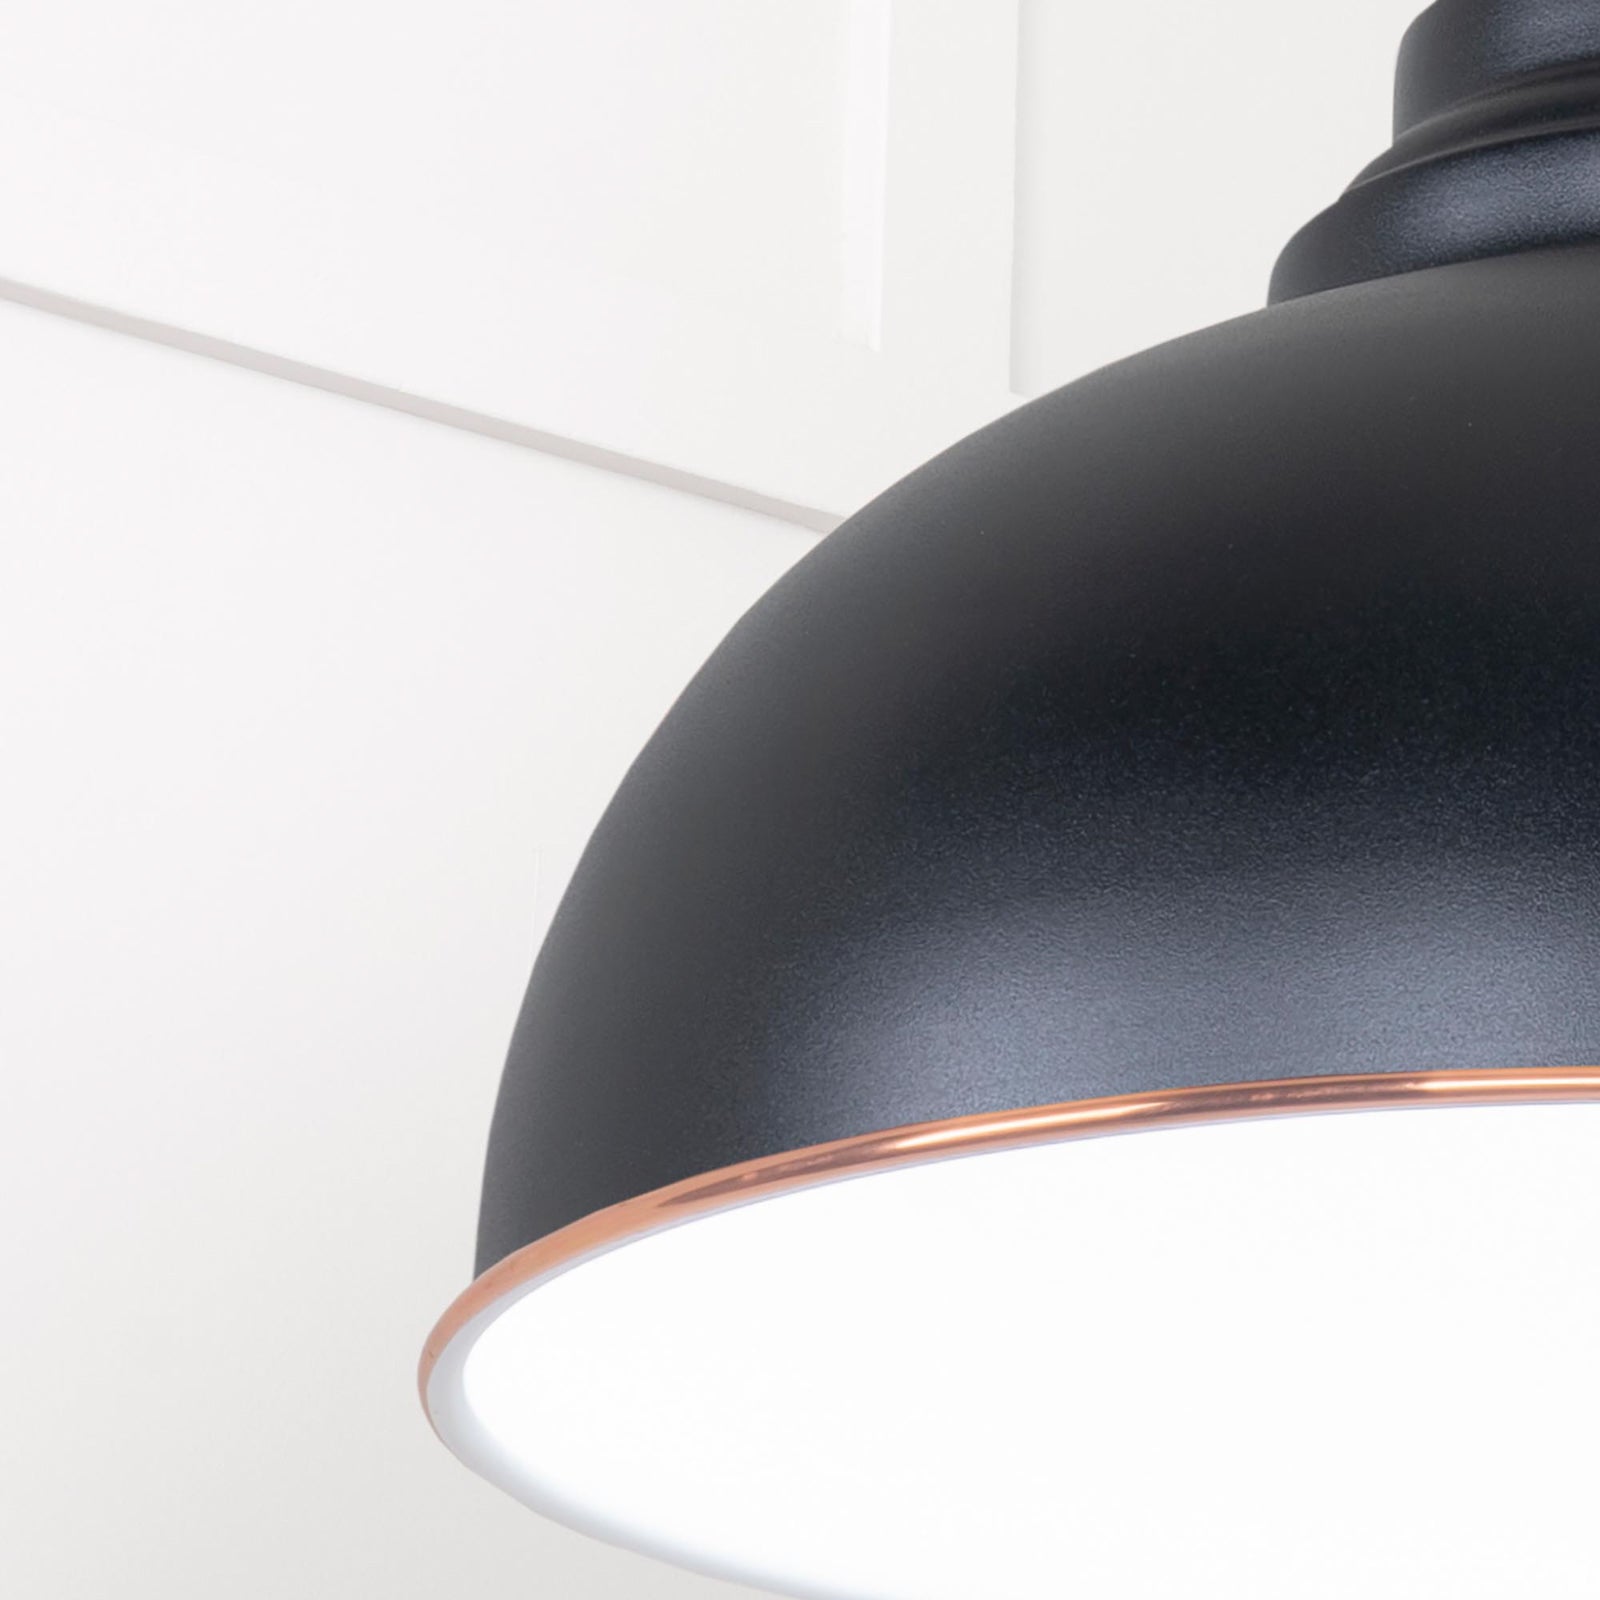 SHOW Close Up Image Harborne Ceiling Light in Elan Black In Frost White